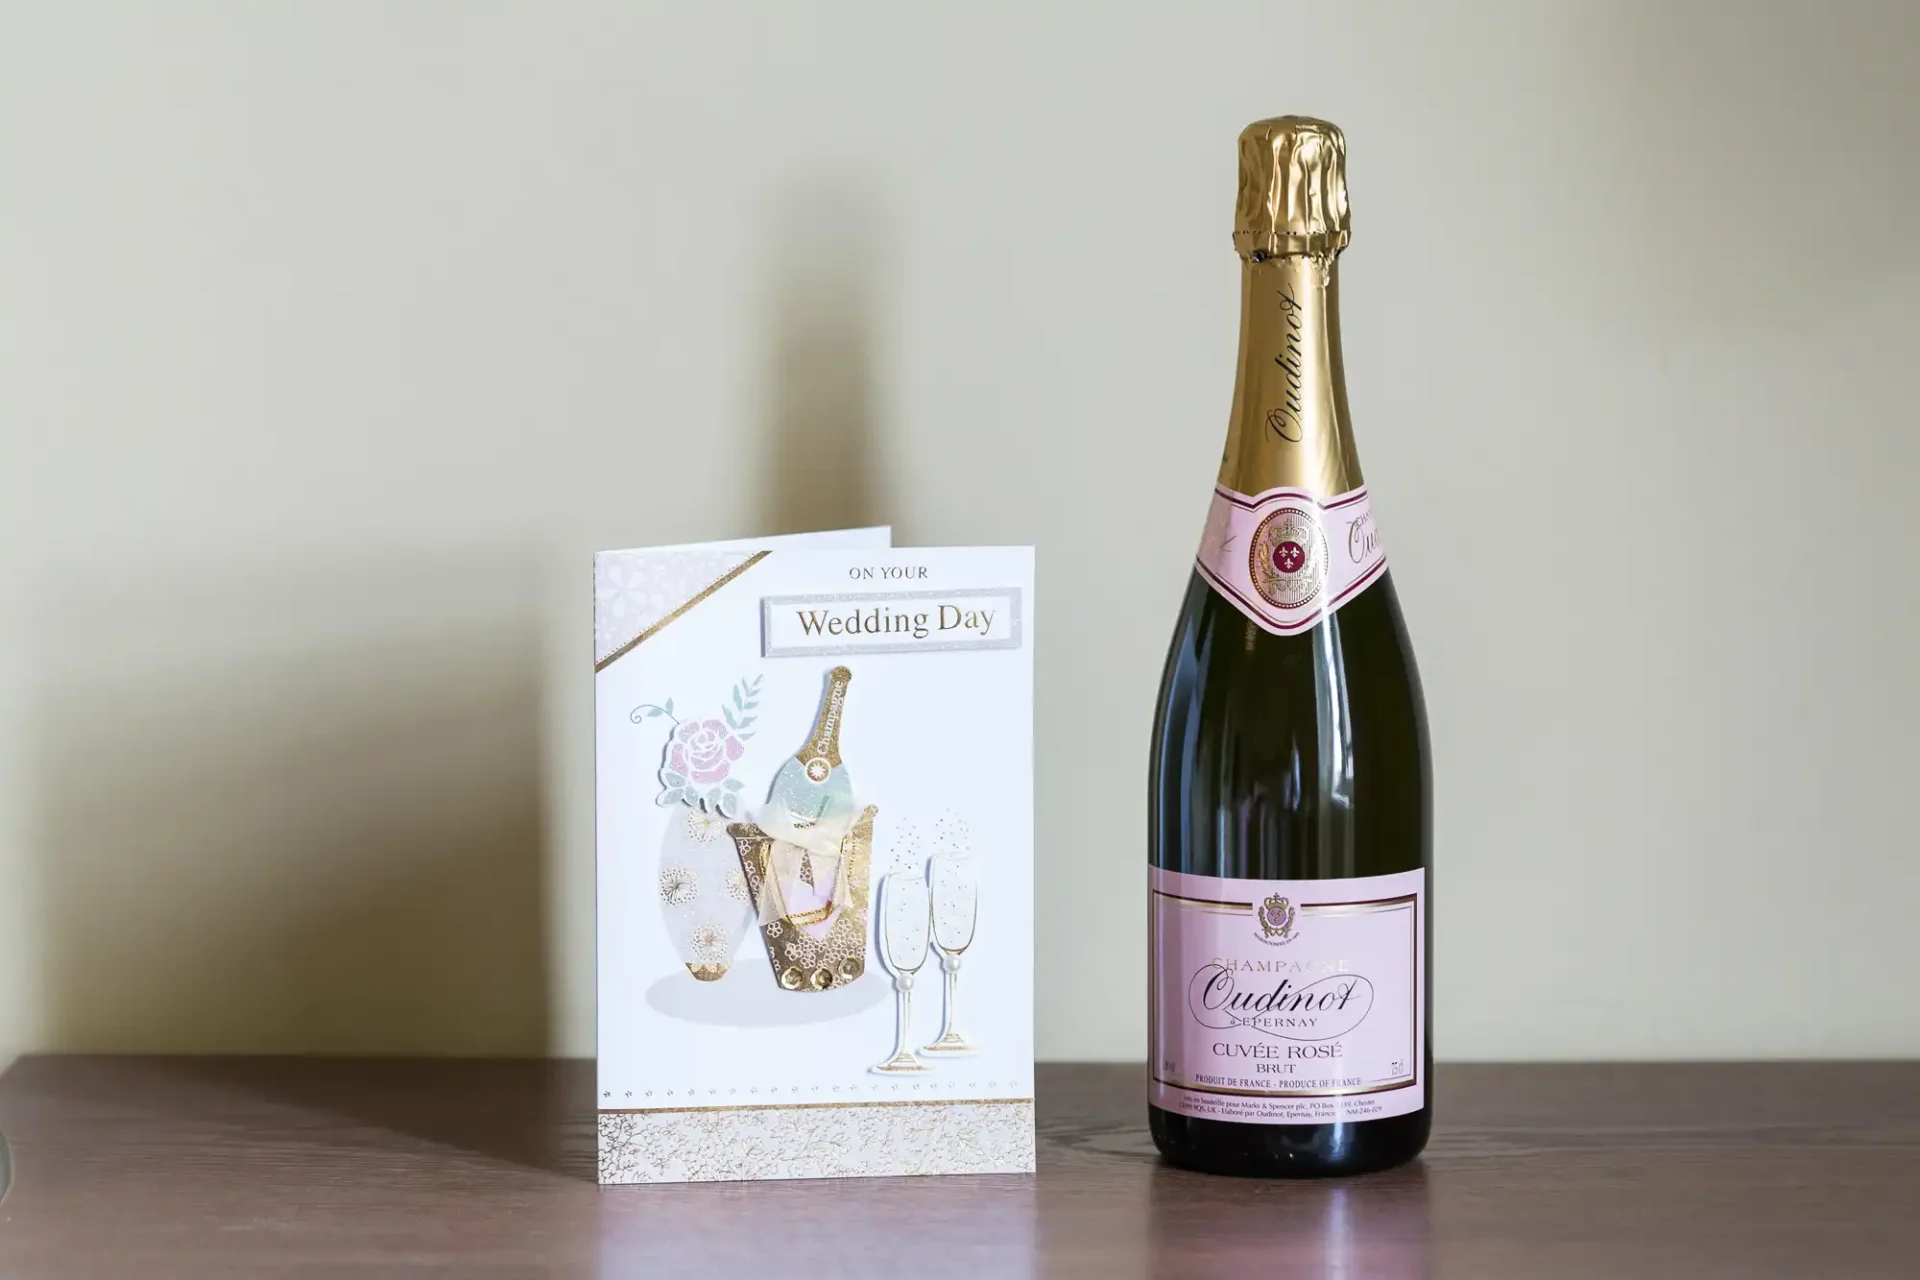 A wedding day card and a bottle of cuvée rosé champagne on a table.